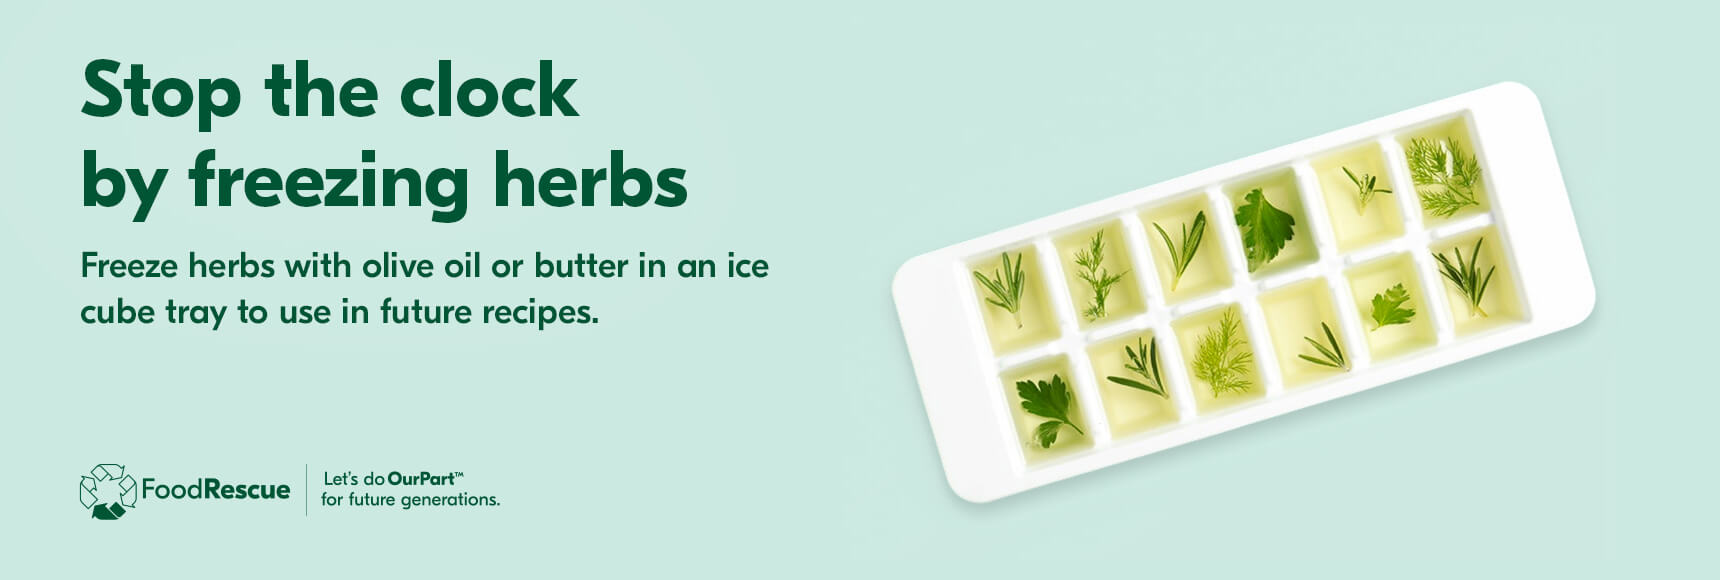 Text reading 'Stop the clock by freezing herbs. Freeze herbs with olive oil or butter in an ice cube tray to use in future recipes.'